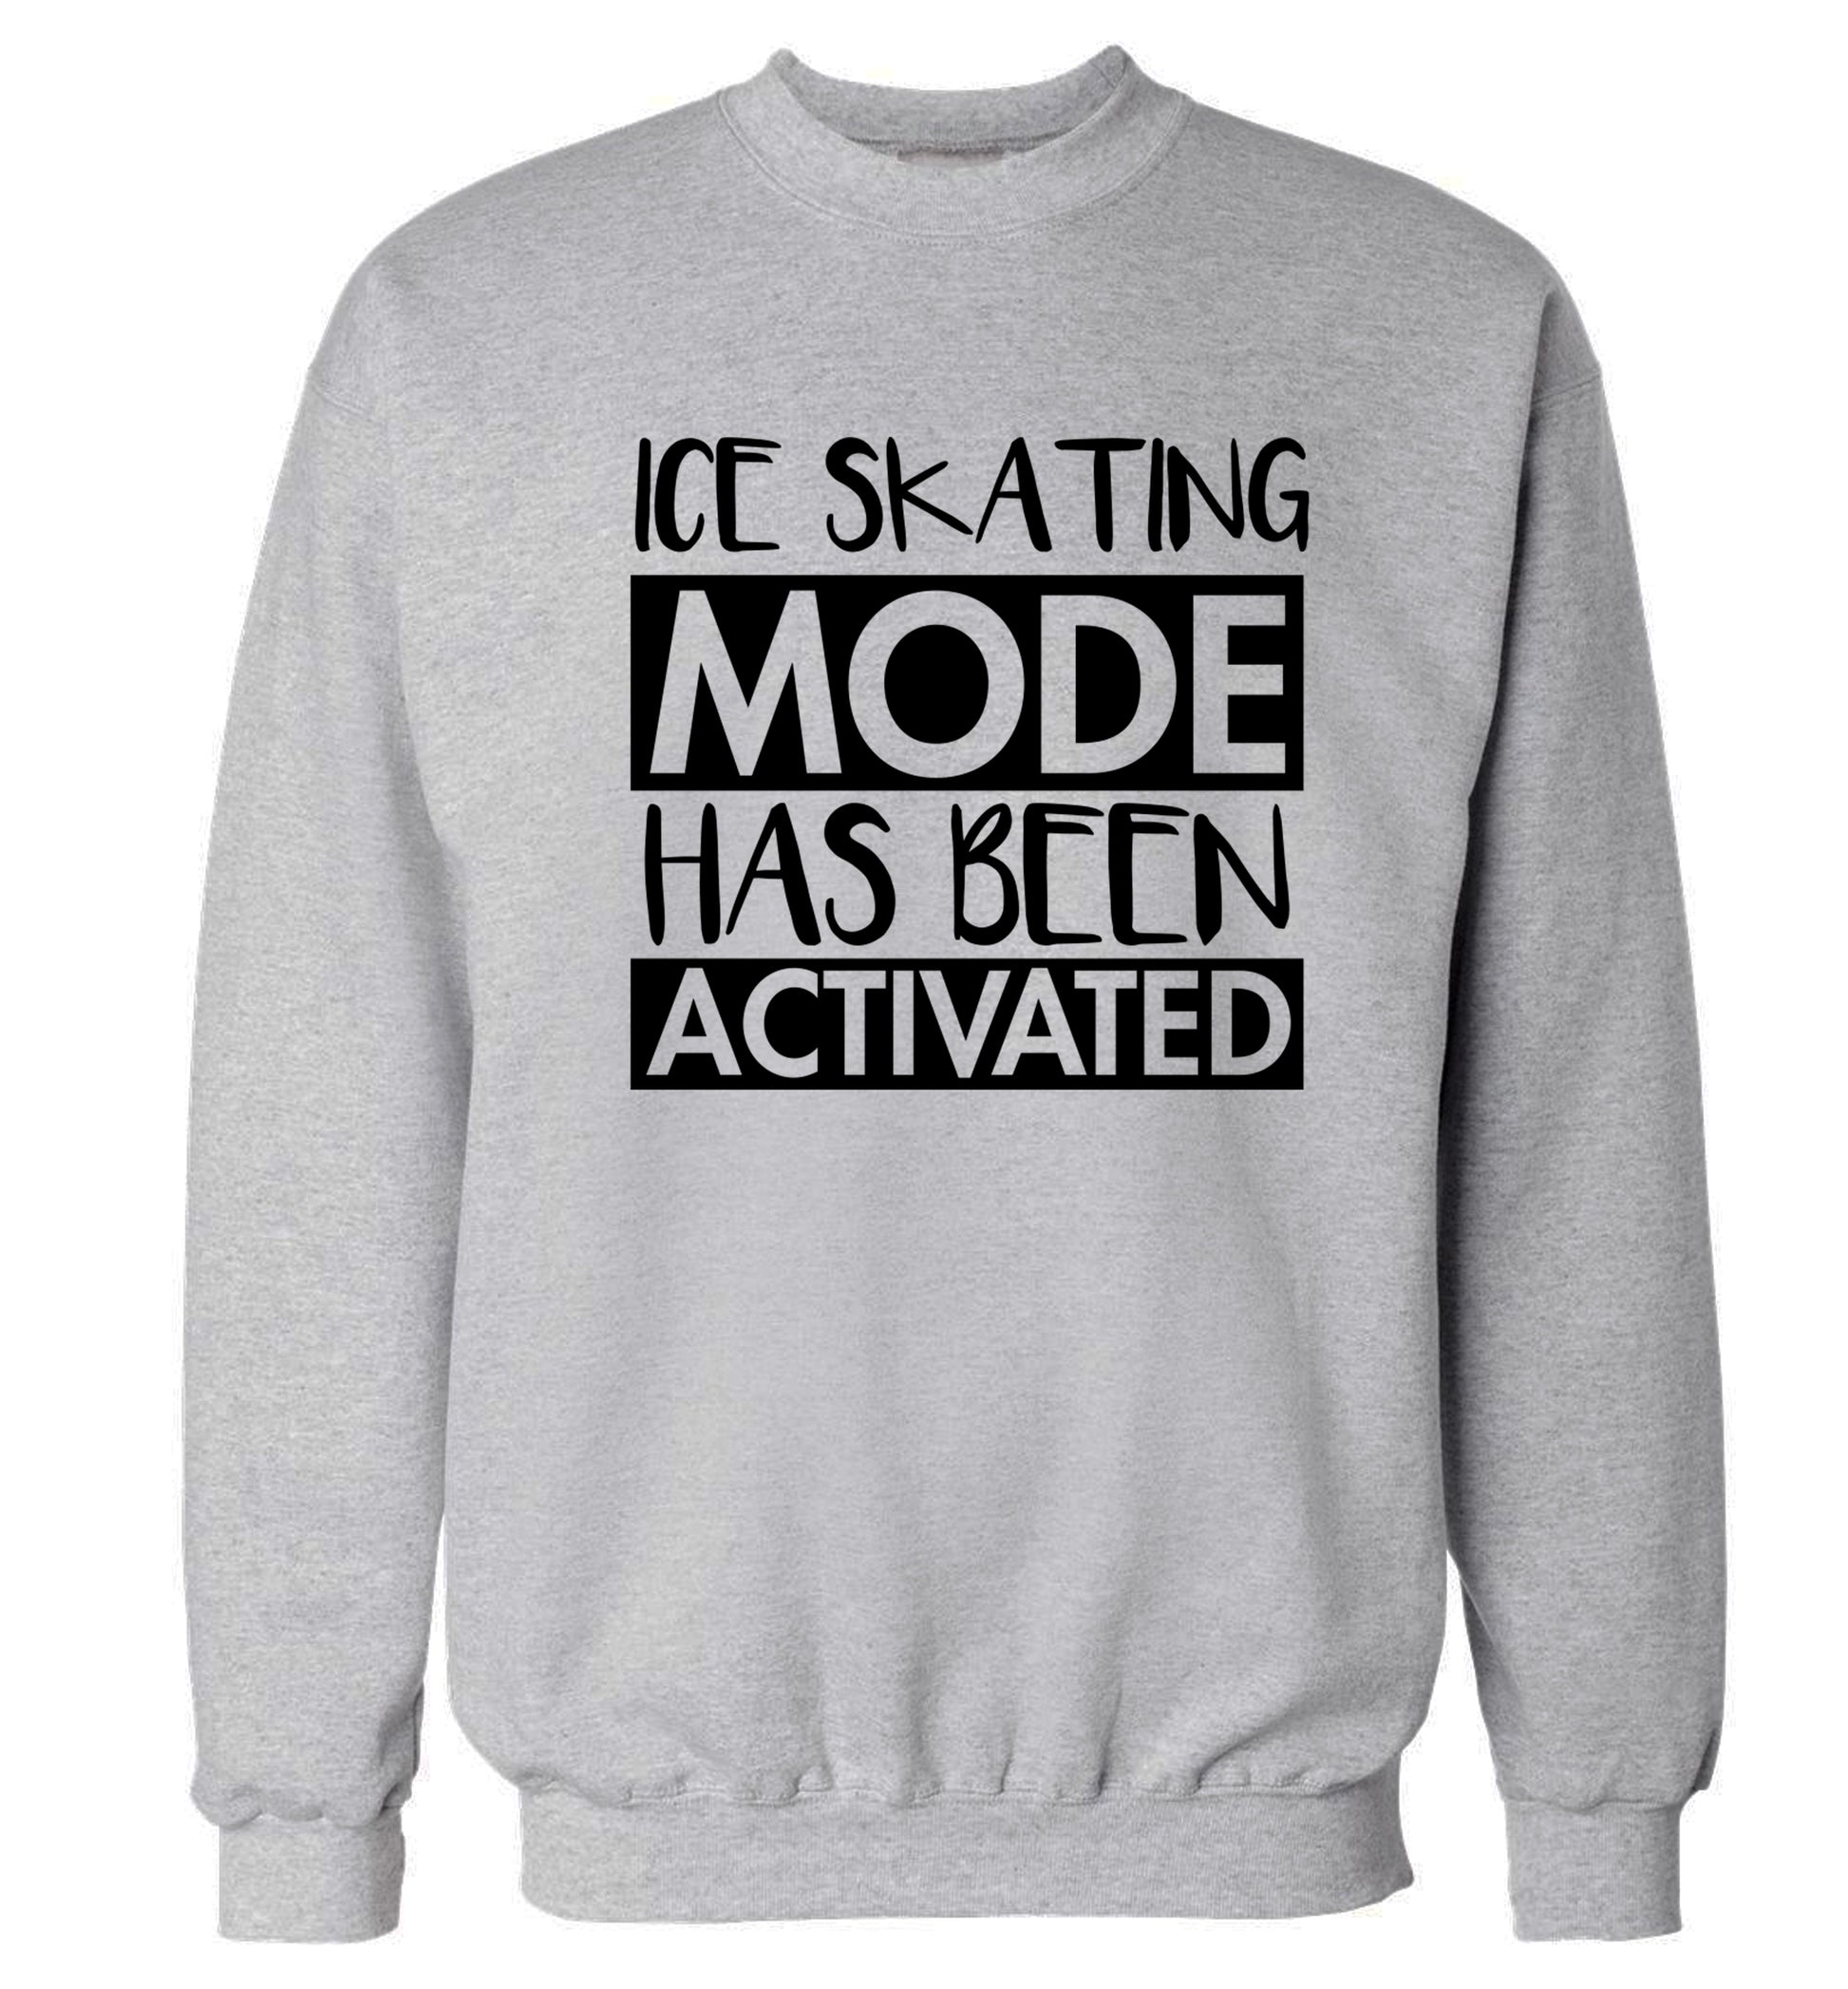 Ice skating mode activated Adult's unisexgrey Sweater 2XL